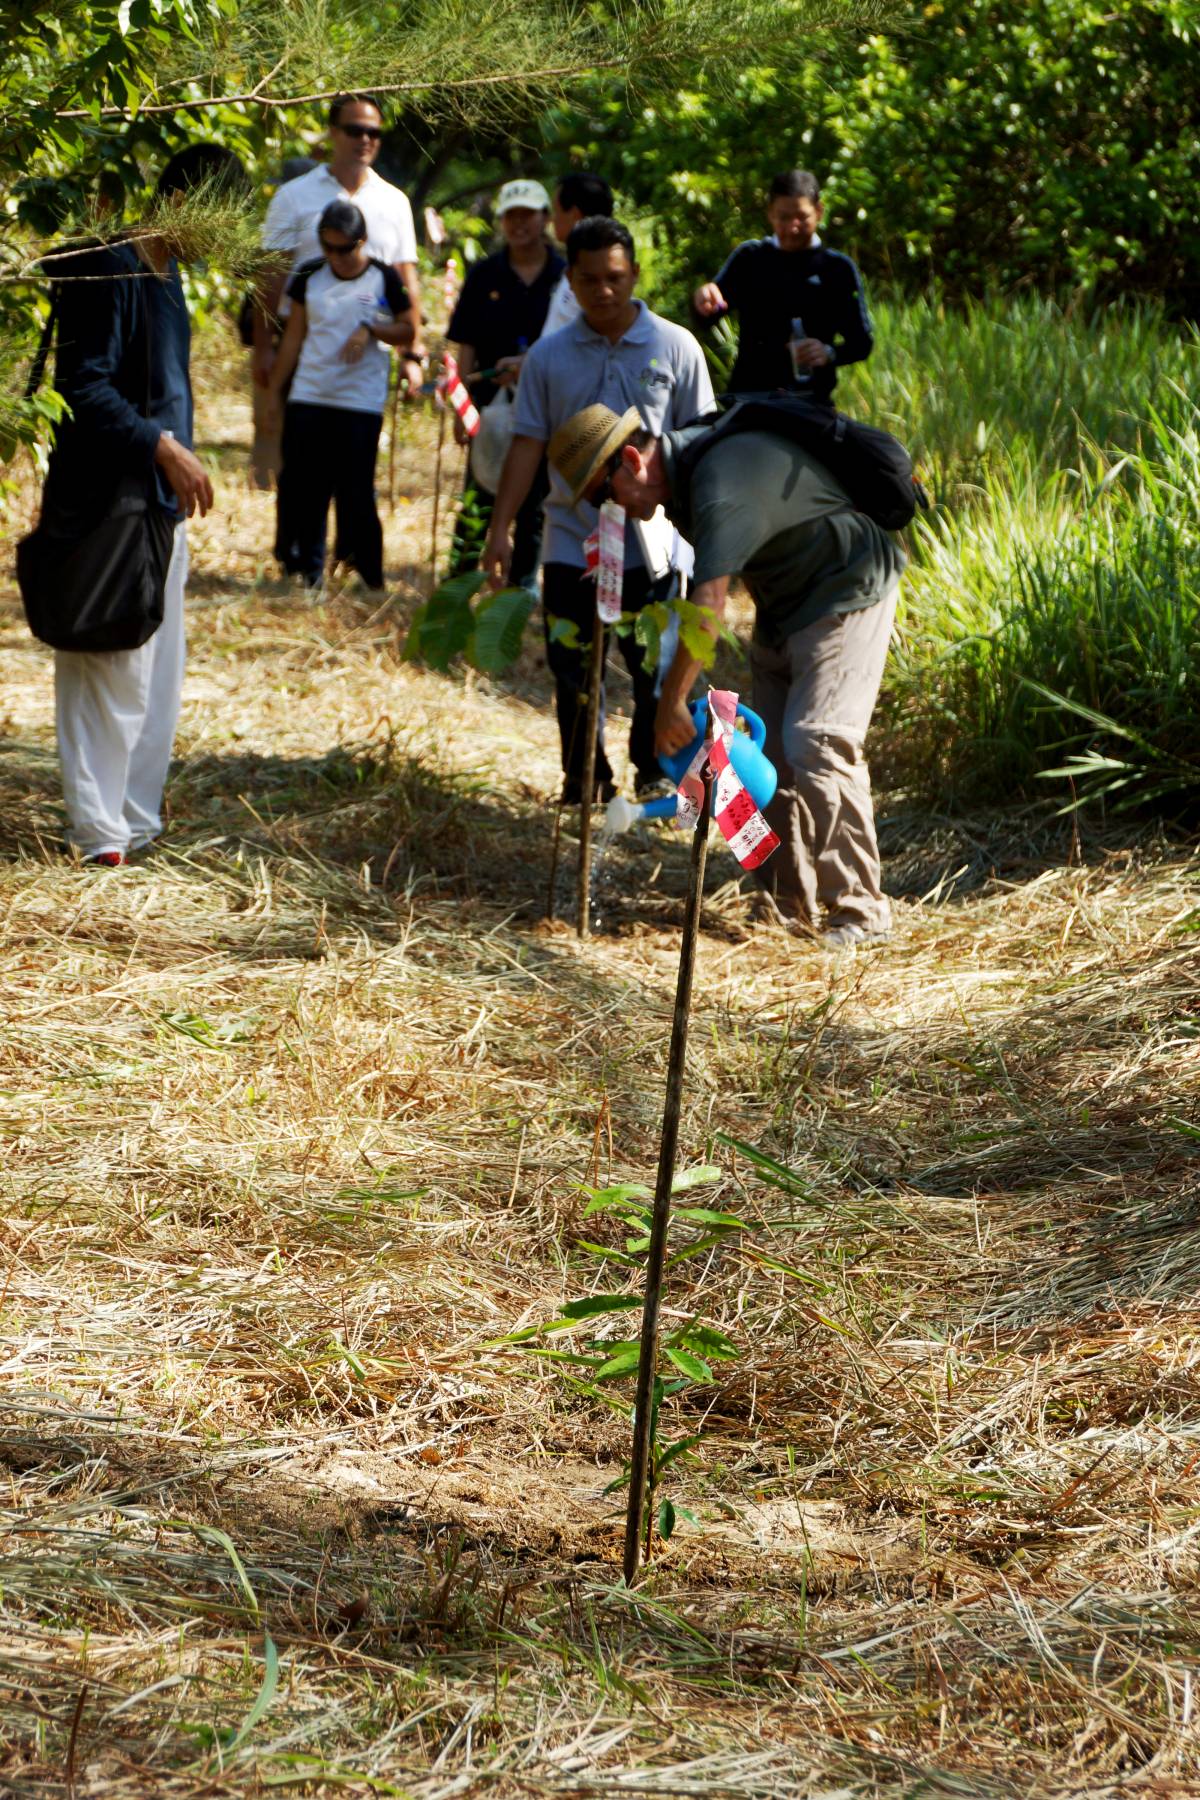 Sarawak Tourism Board holds Tree Planting Ceremony in Conjunction with Borneo Jazz 2015